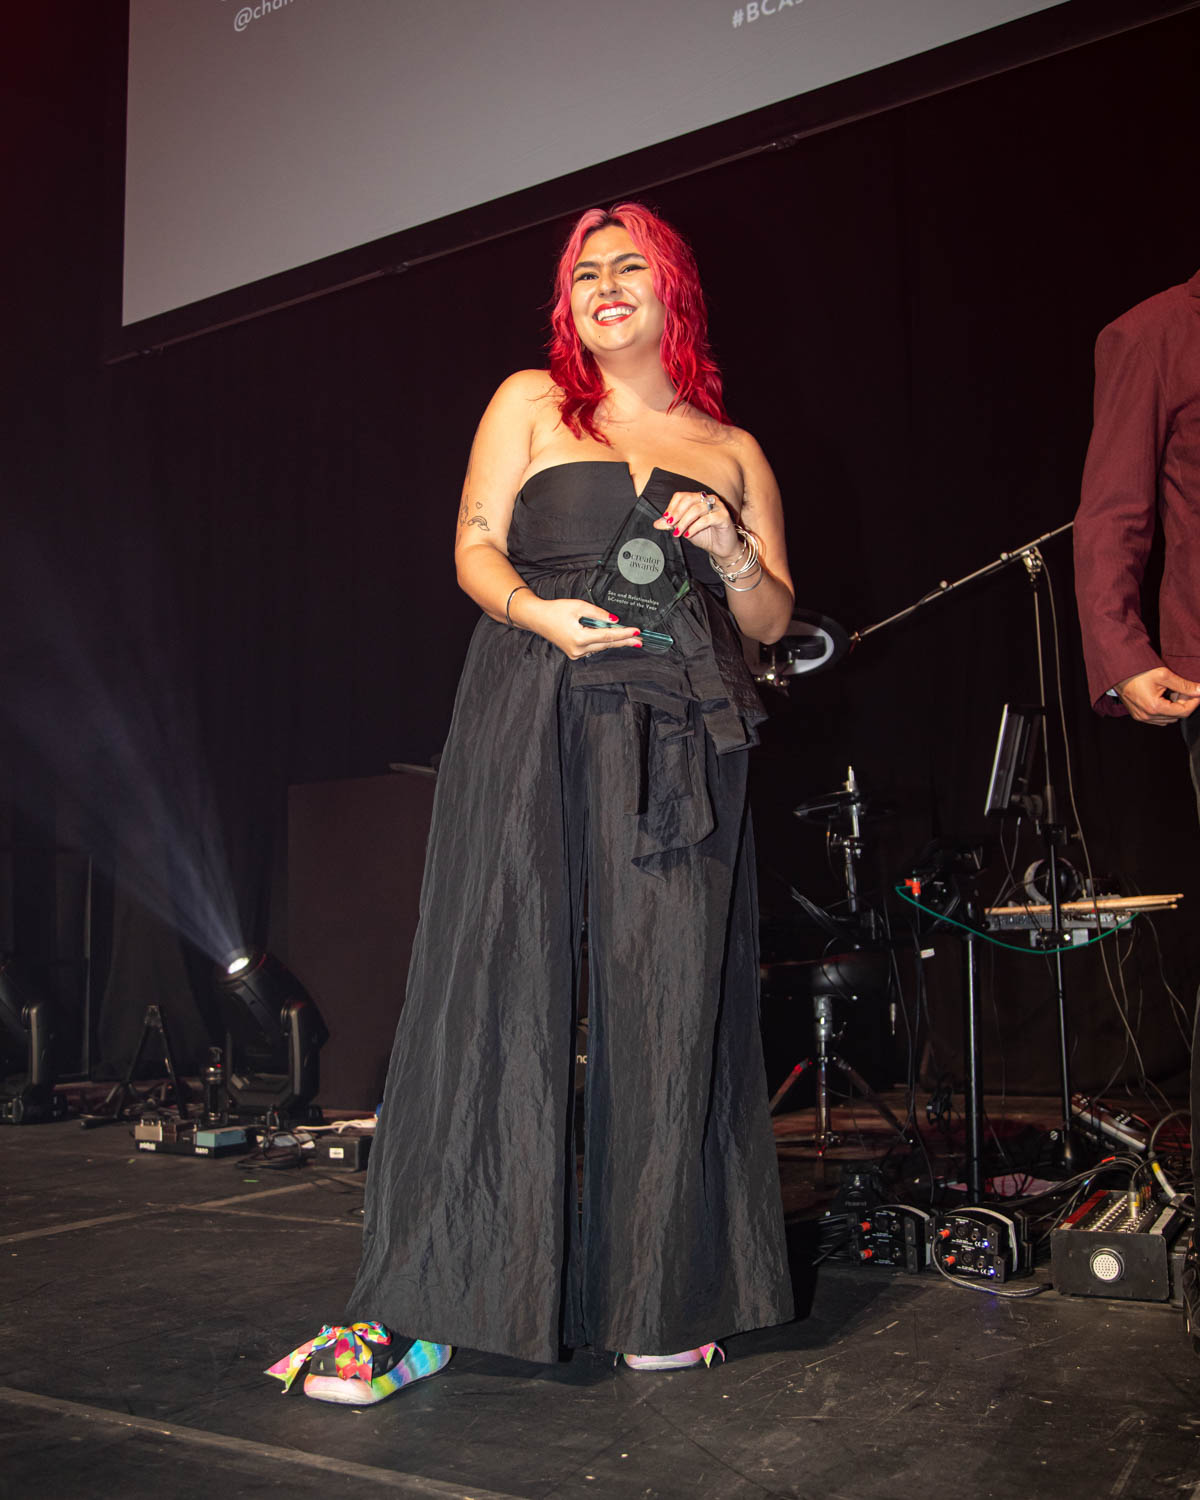 Sex & Relationships bCreator of the year winner
Ruby Rare – @rubyrare
